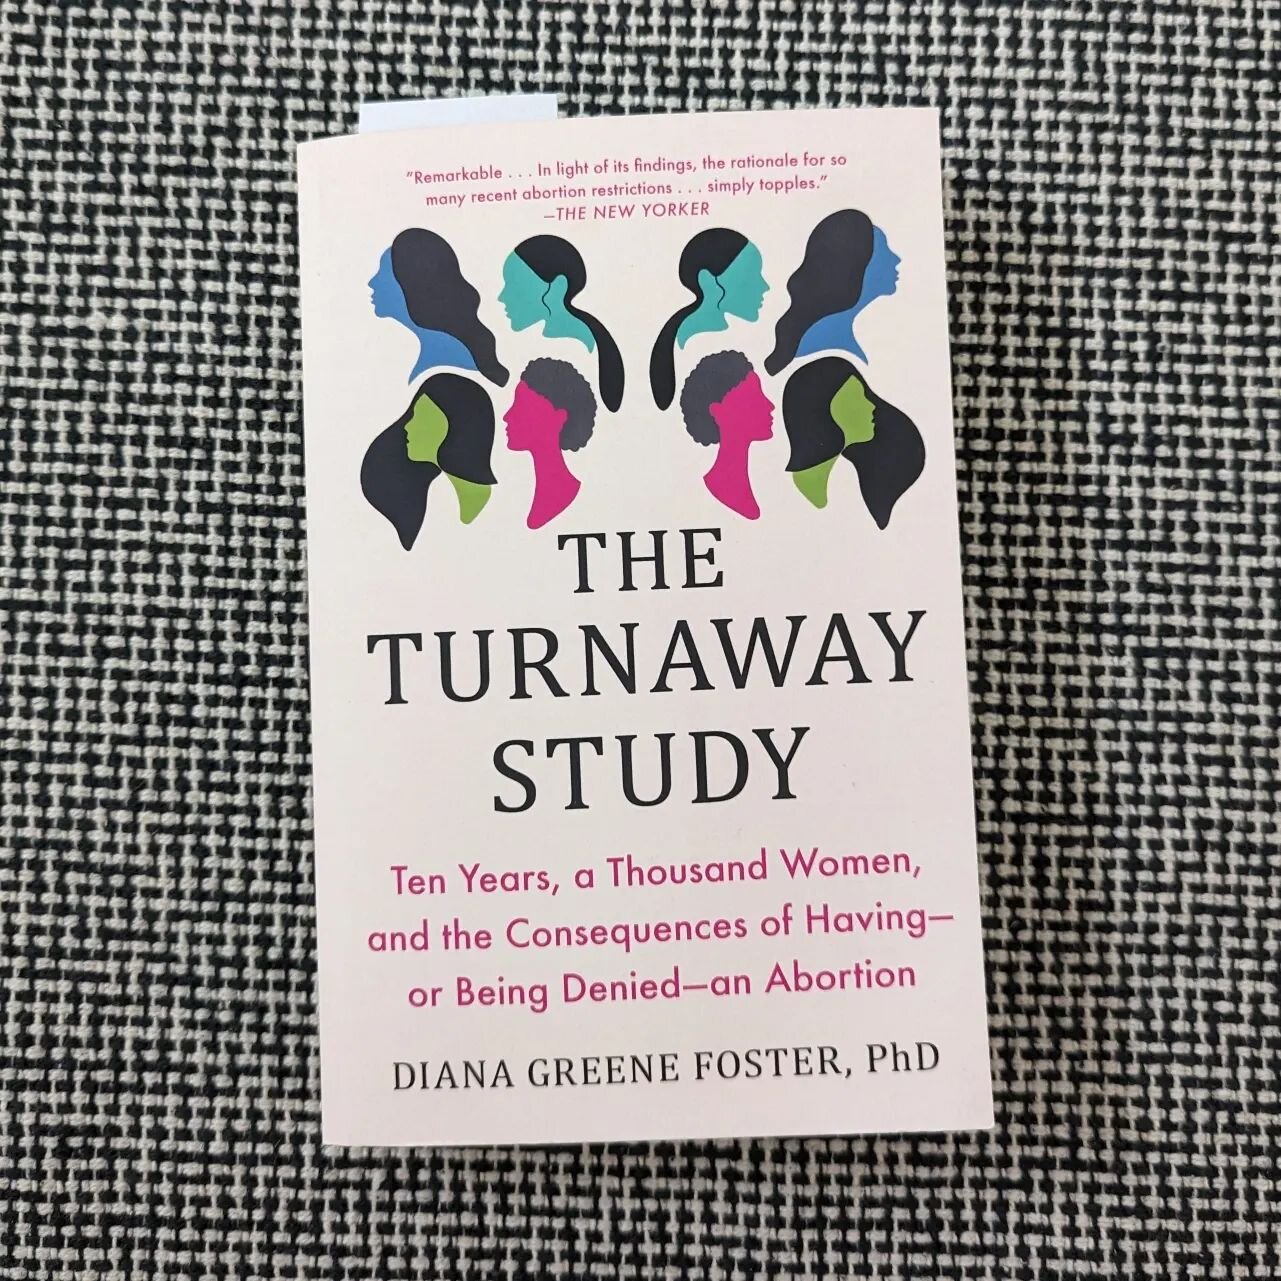 Apropos of absolutely nothing at all, I wanted to share one of the newer additions to the library here in clinic. This book is a summary of the landmark study called The Turnaway Study, which (as the cover says) looked at how around 1000 women's live